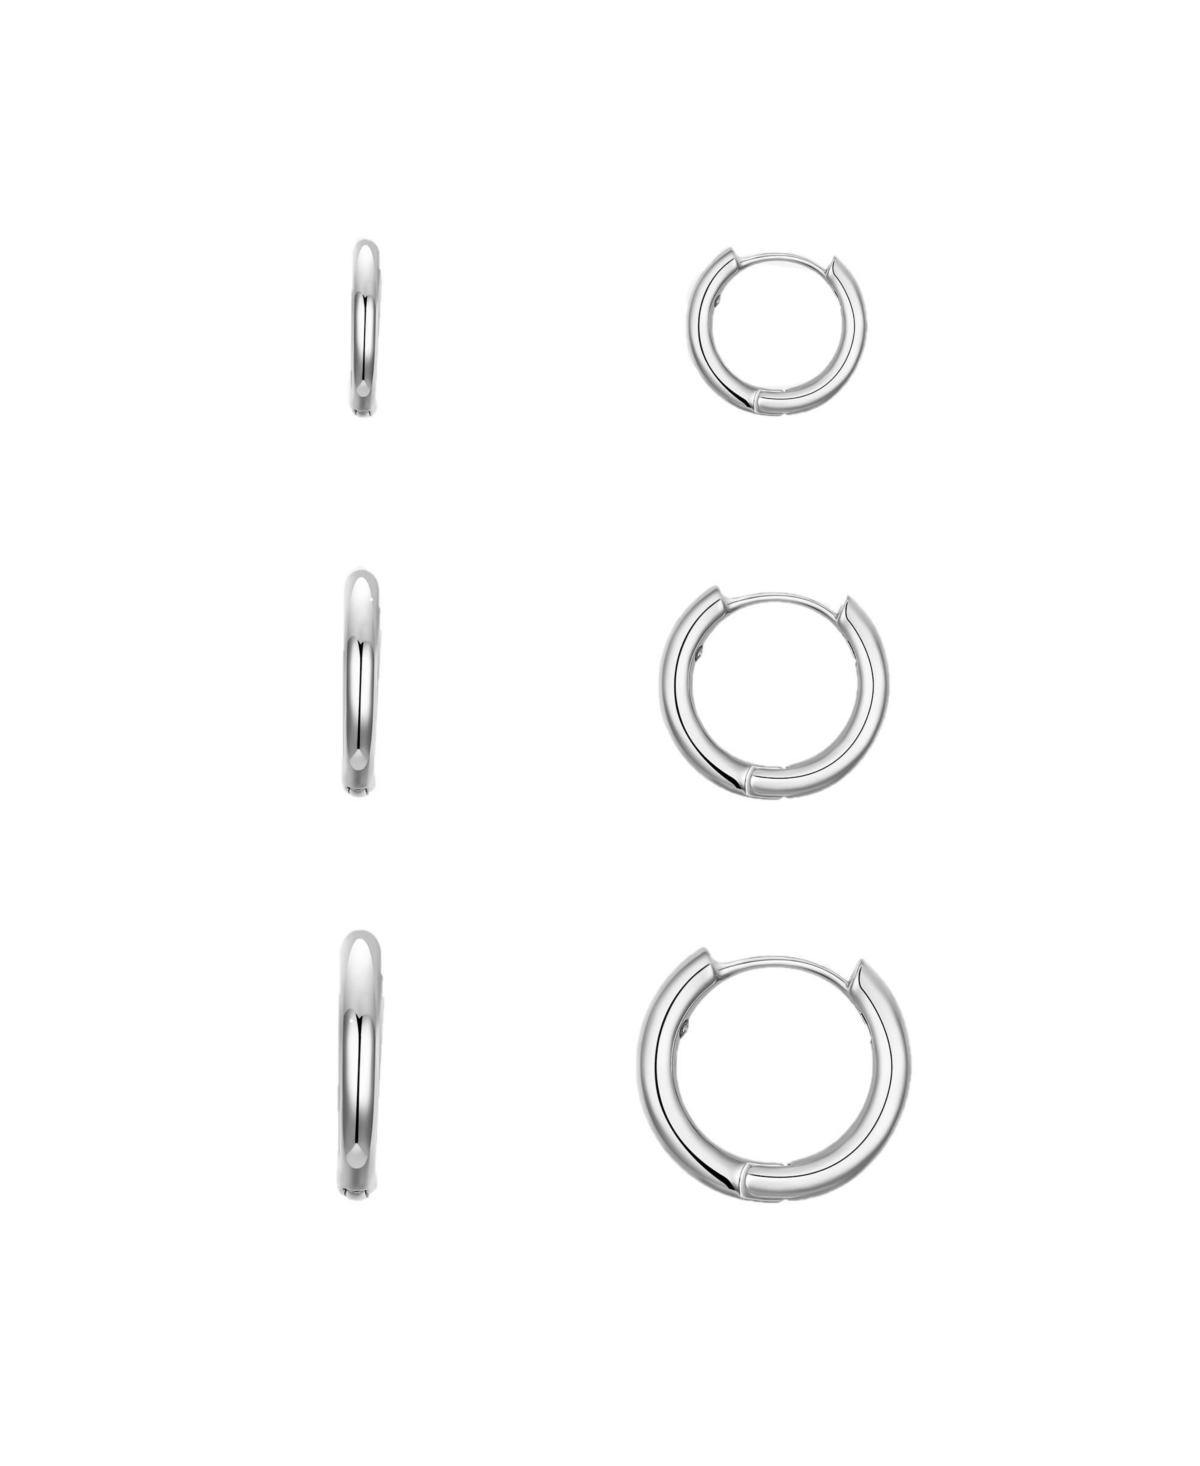 Silver-Tone or Gold-Tone Stainless Steel Endless Hoop Earring Set - Silver